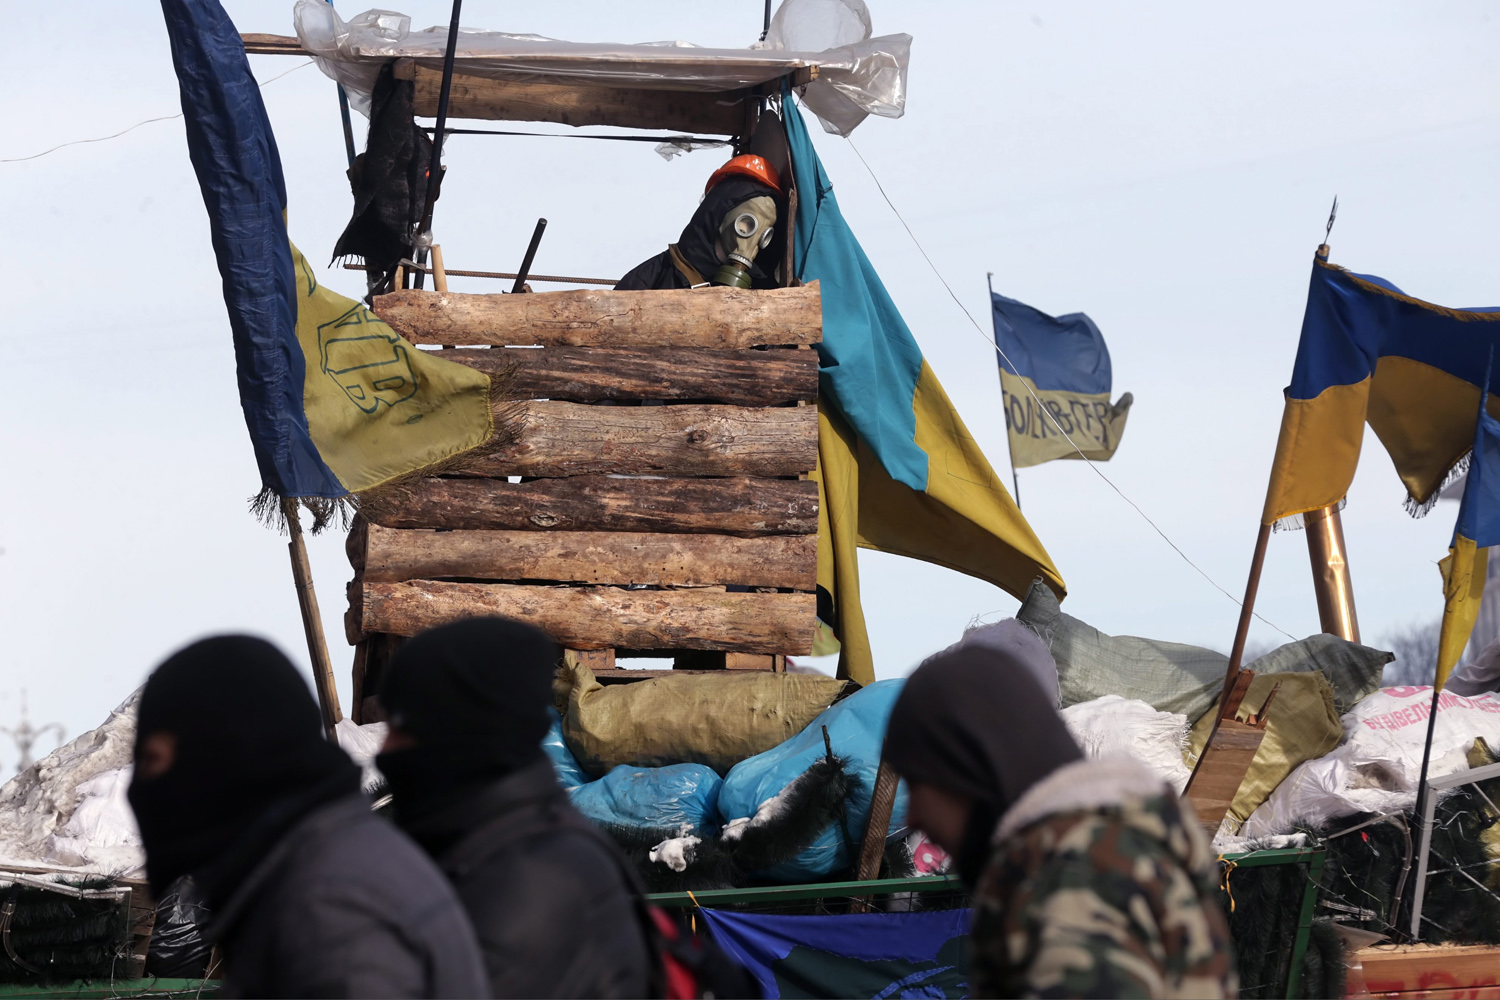 Feb. 1, 2014. Protesters stand guard near one of the barricade during the continuing protest in Kiev, Ukraine.